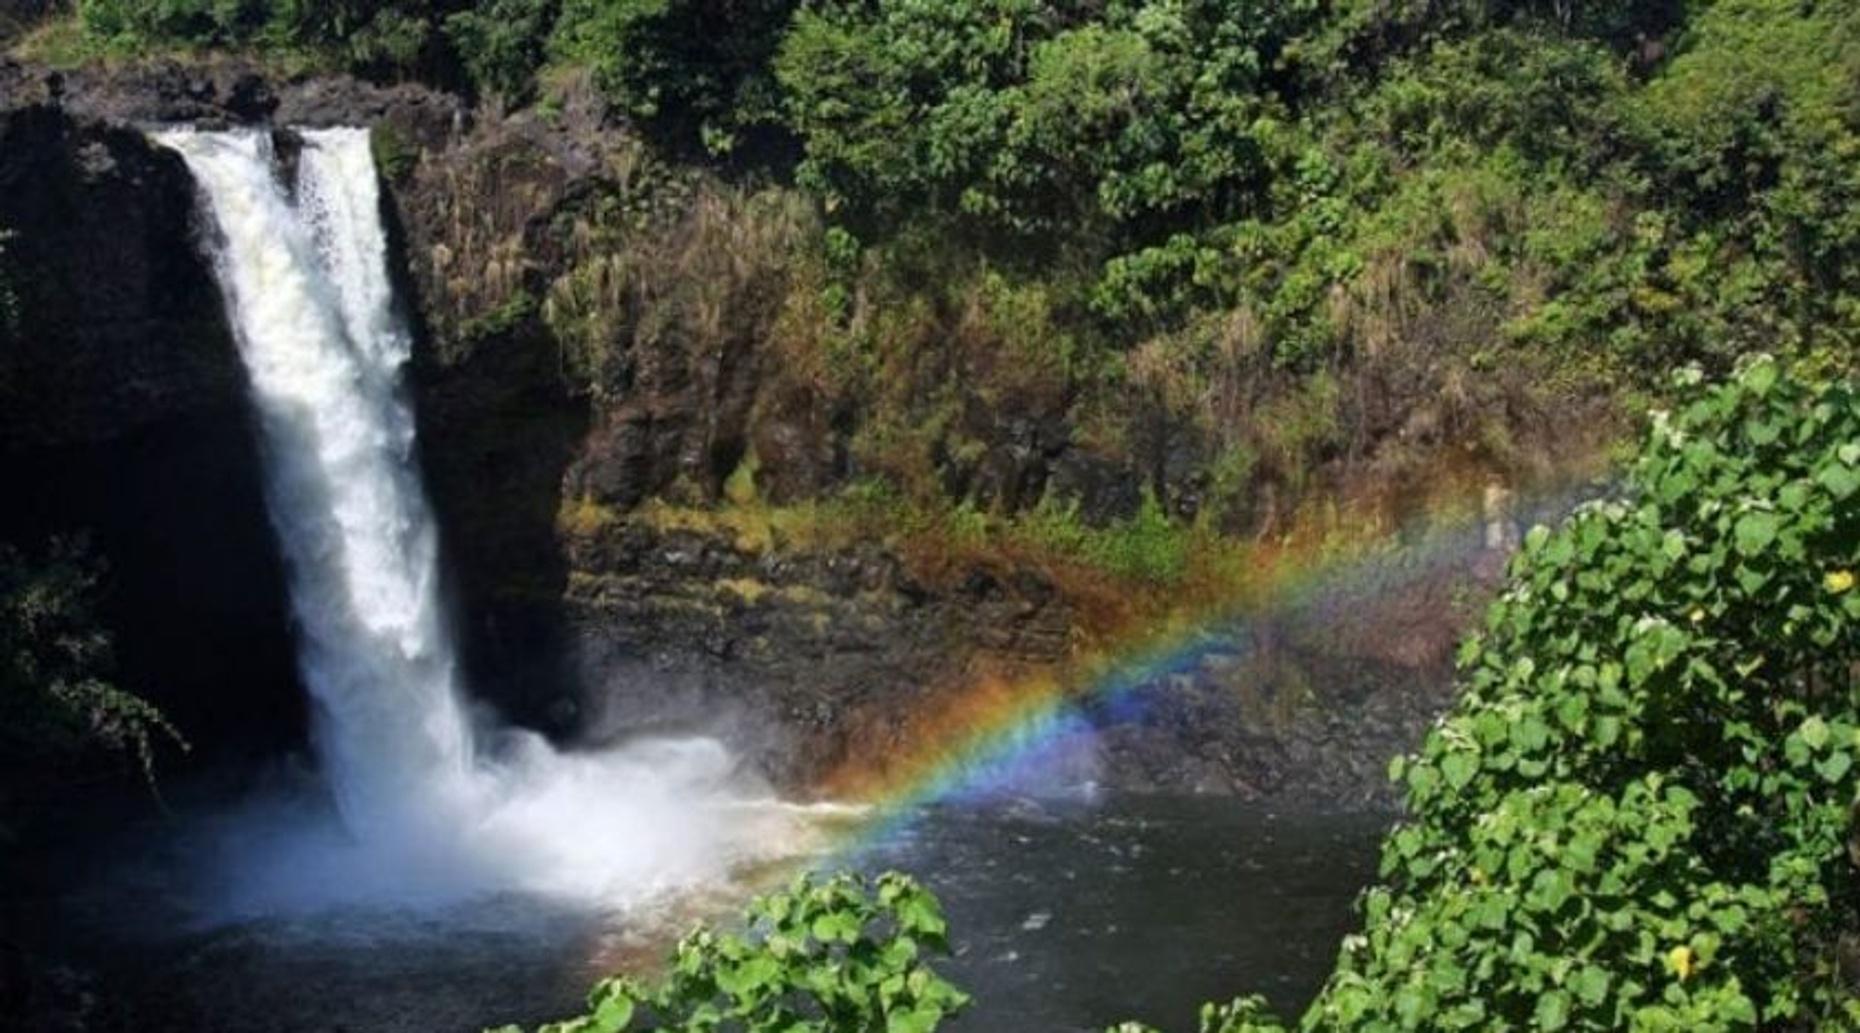 big island tours from hilo